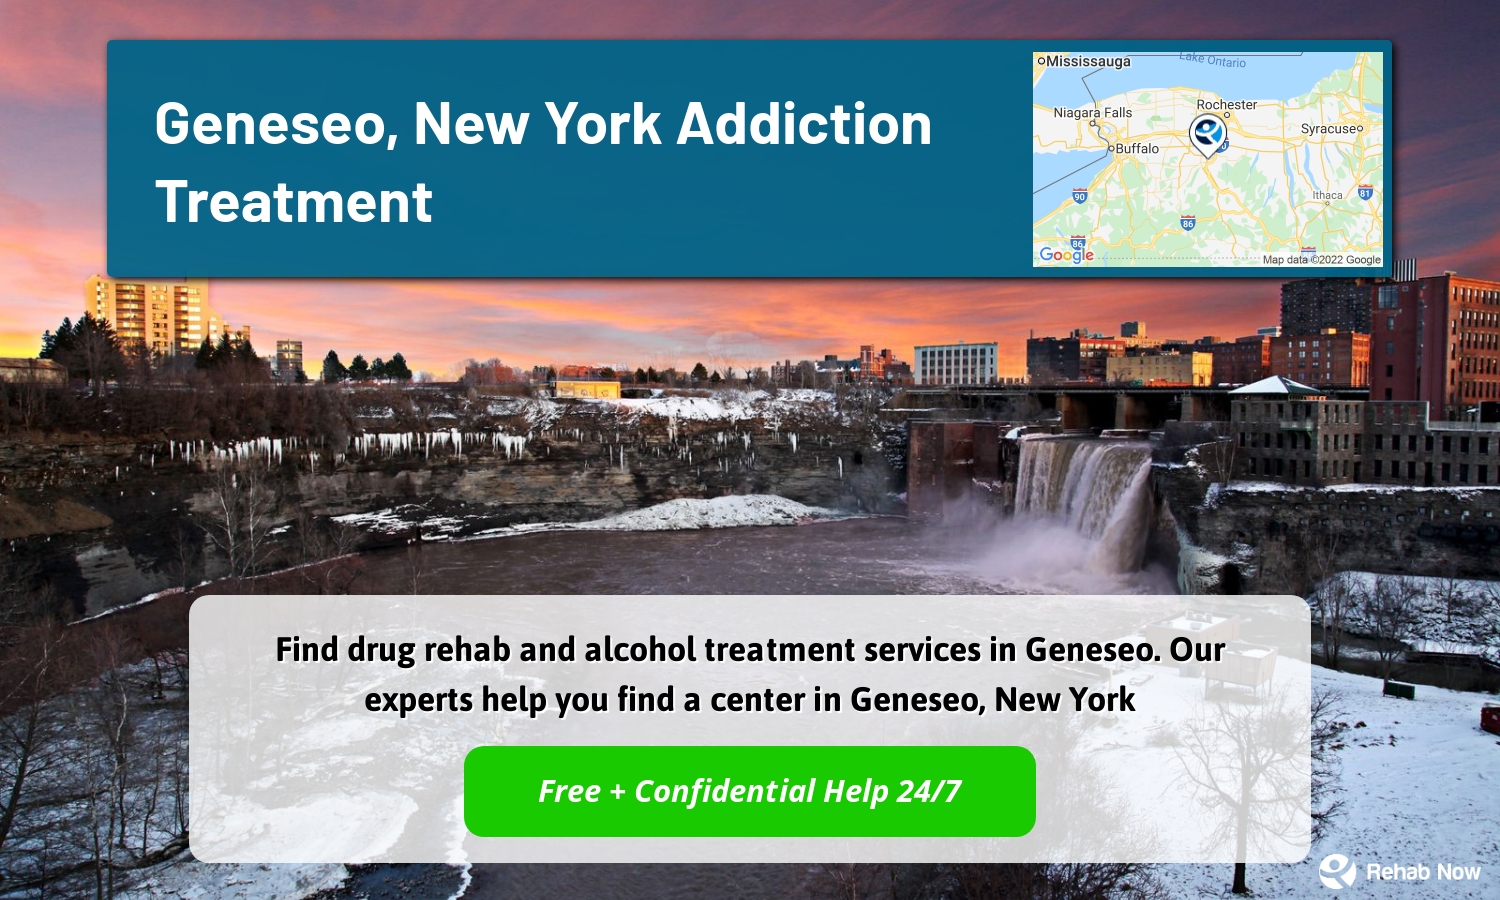 Find drug rehab and alcohol treatment services in Geneseo. Our experts help you find a center in Geneseo, New York